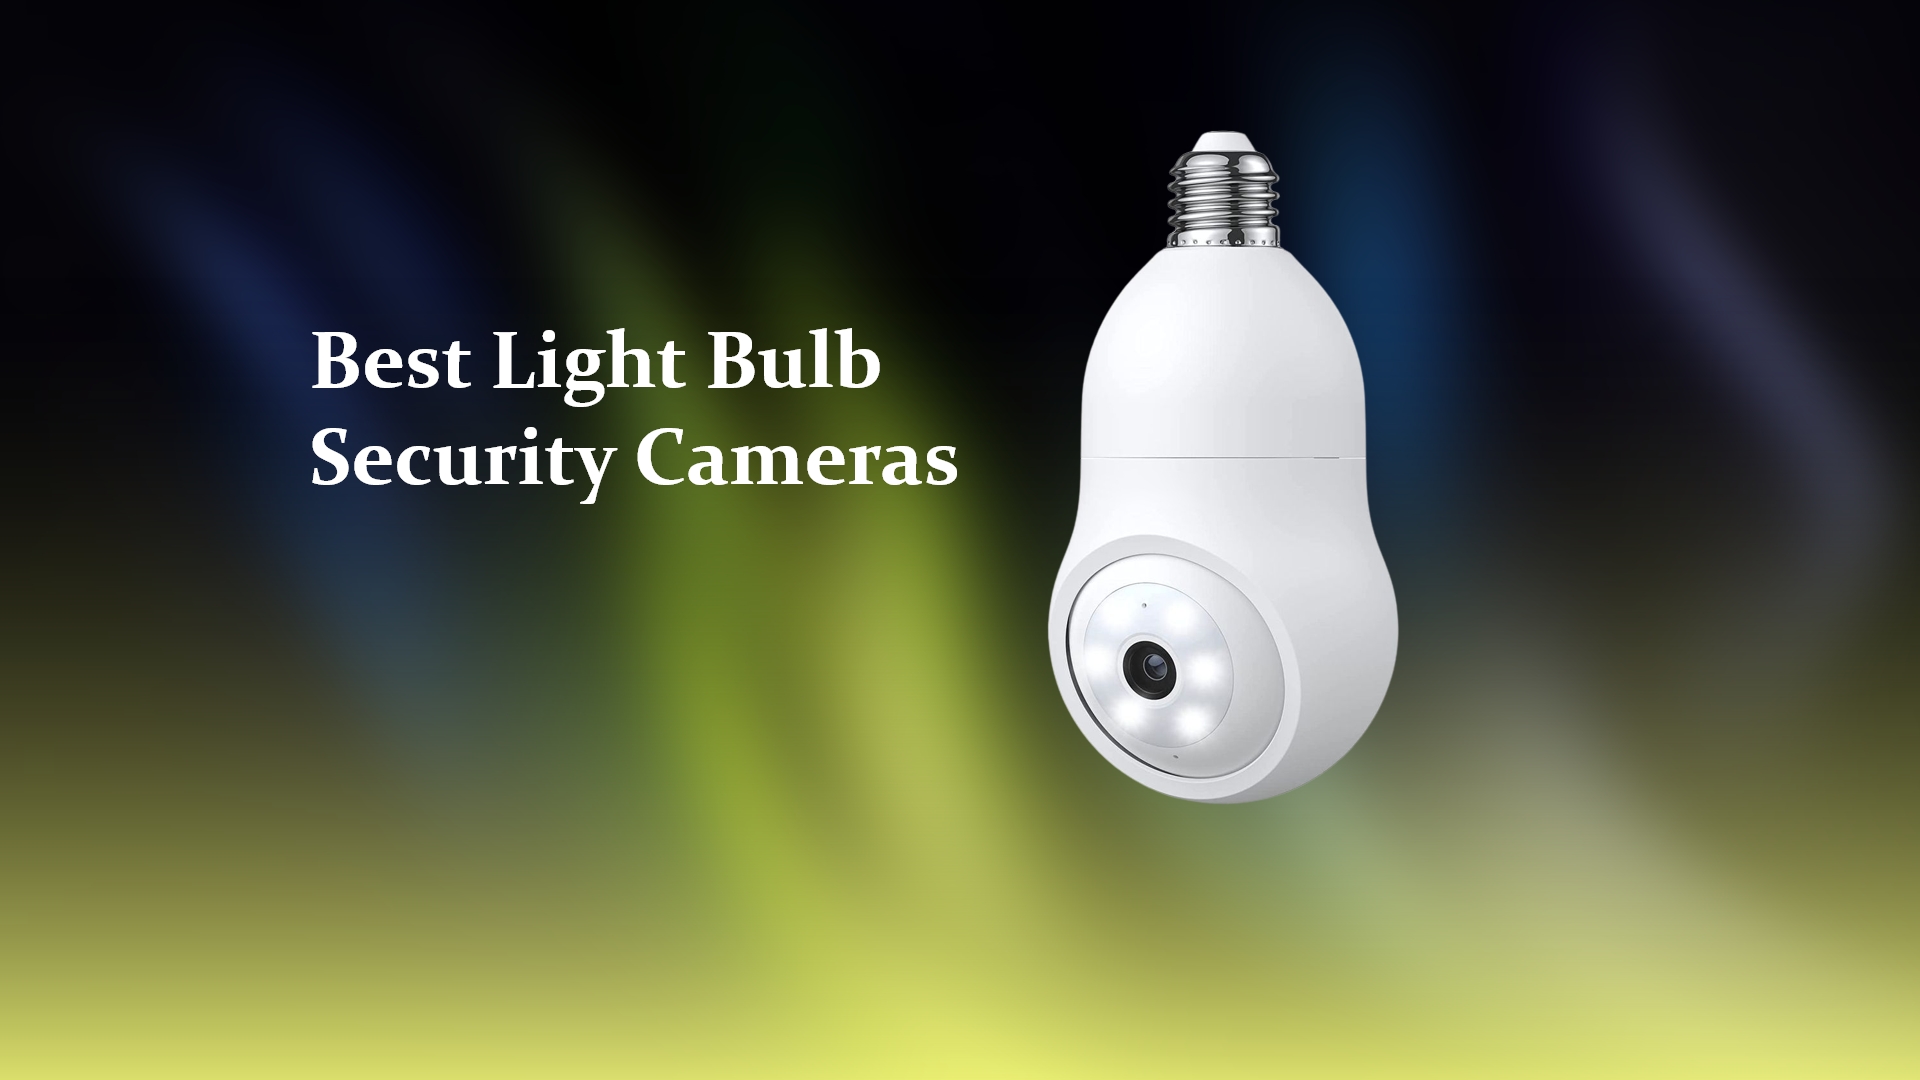 6 Best Light Bulb Security Cameras: Sneaky Way to Secure Your Place